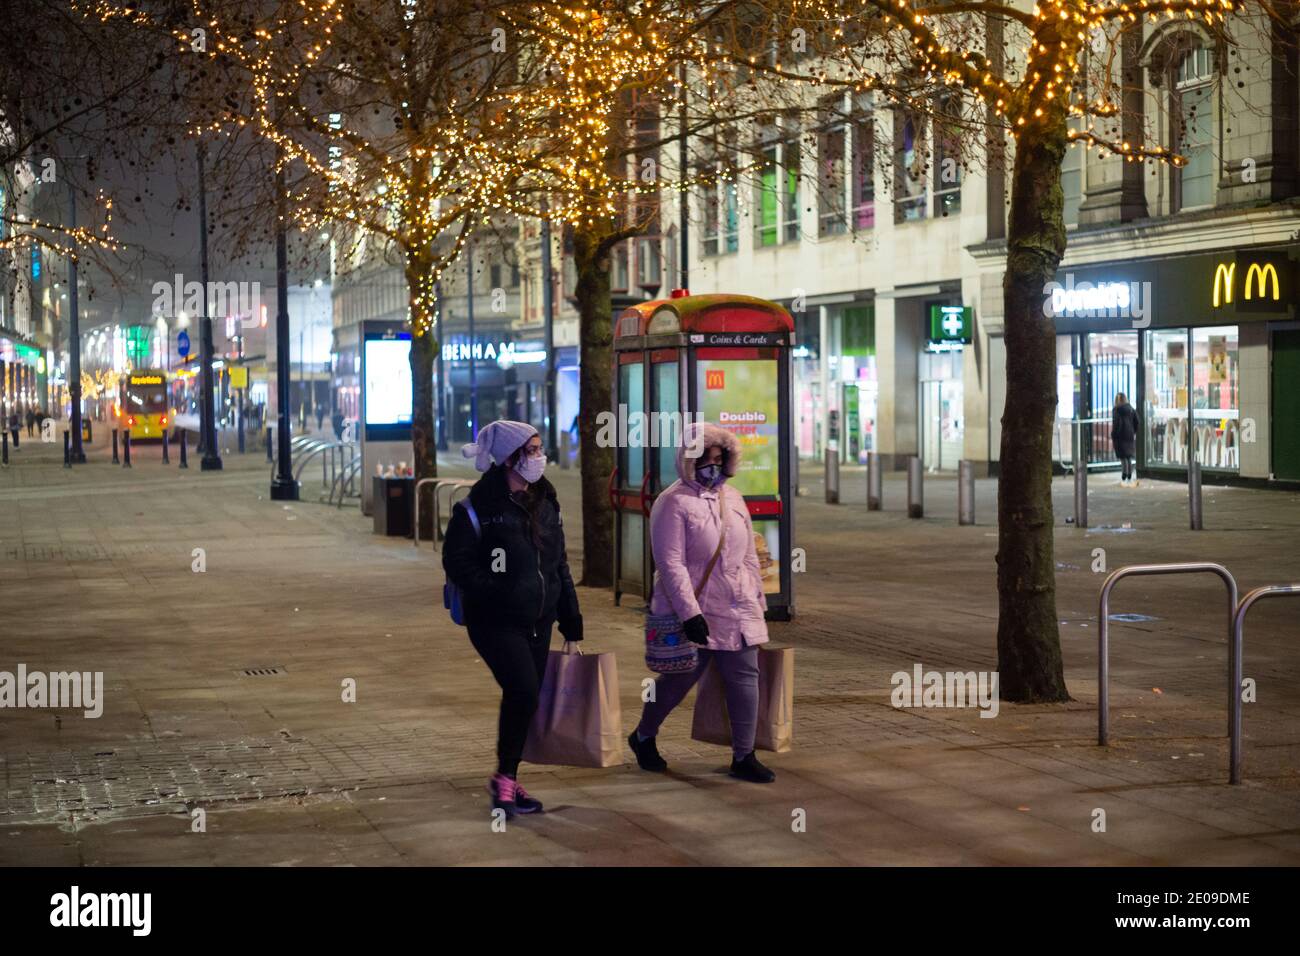 Manchester, England, UK. 30th Dec 2020. Scenes from around Manchester city centre late on the evening of the 30th. At midnight the city will be placed under Tier 4 coronavirus restrictions after a government announcement earlier today. Two women wearing face masks walk up the street carrying shopping bags. Credit: Callum Fraser/Alamy Live News Stock Photo